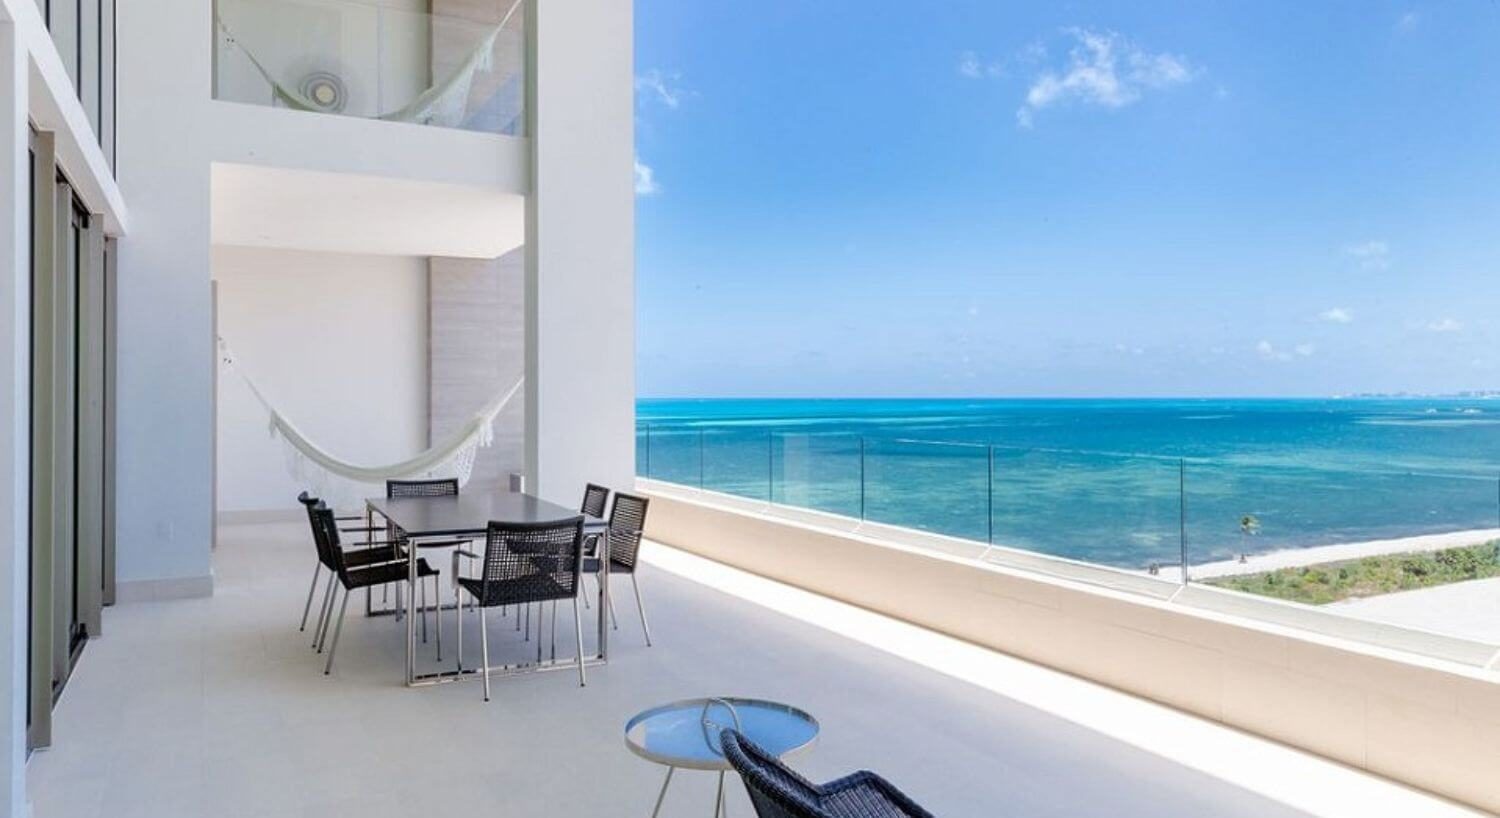 A spacious outdoor balcony with patio furniture, dining table and chairs, hammock, a second floor balcony with hammock, and sweeping views of the turquoise Caribbean ocean.